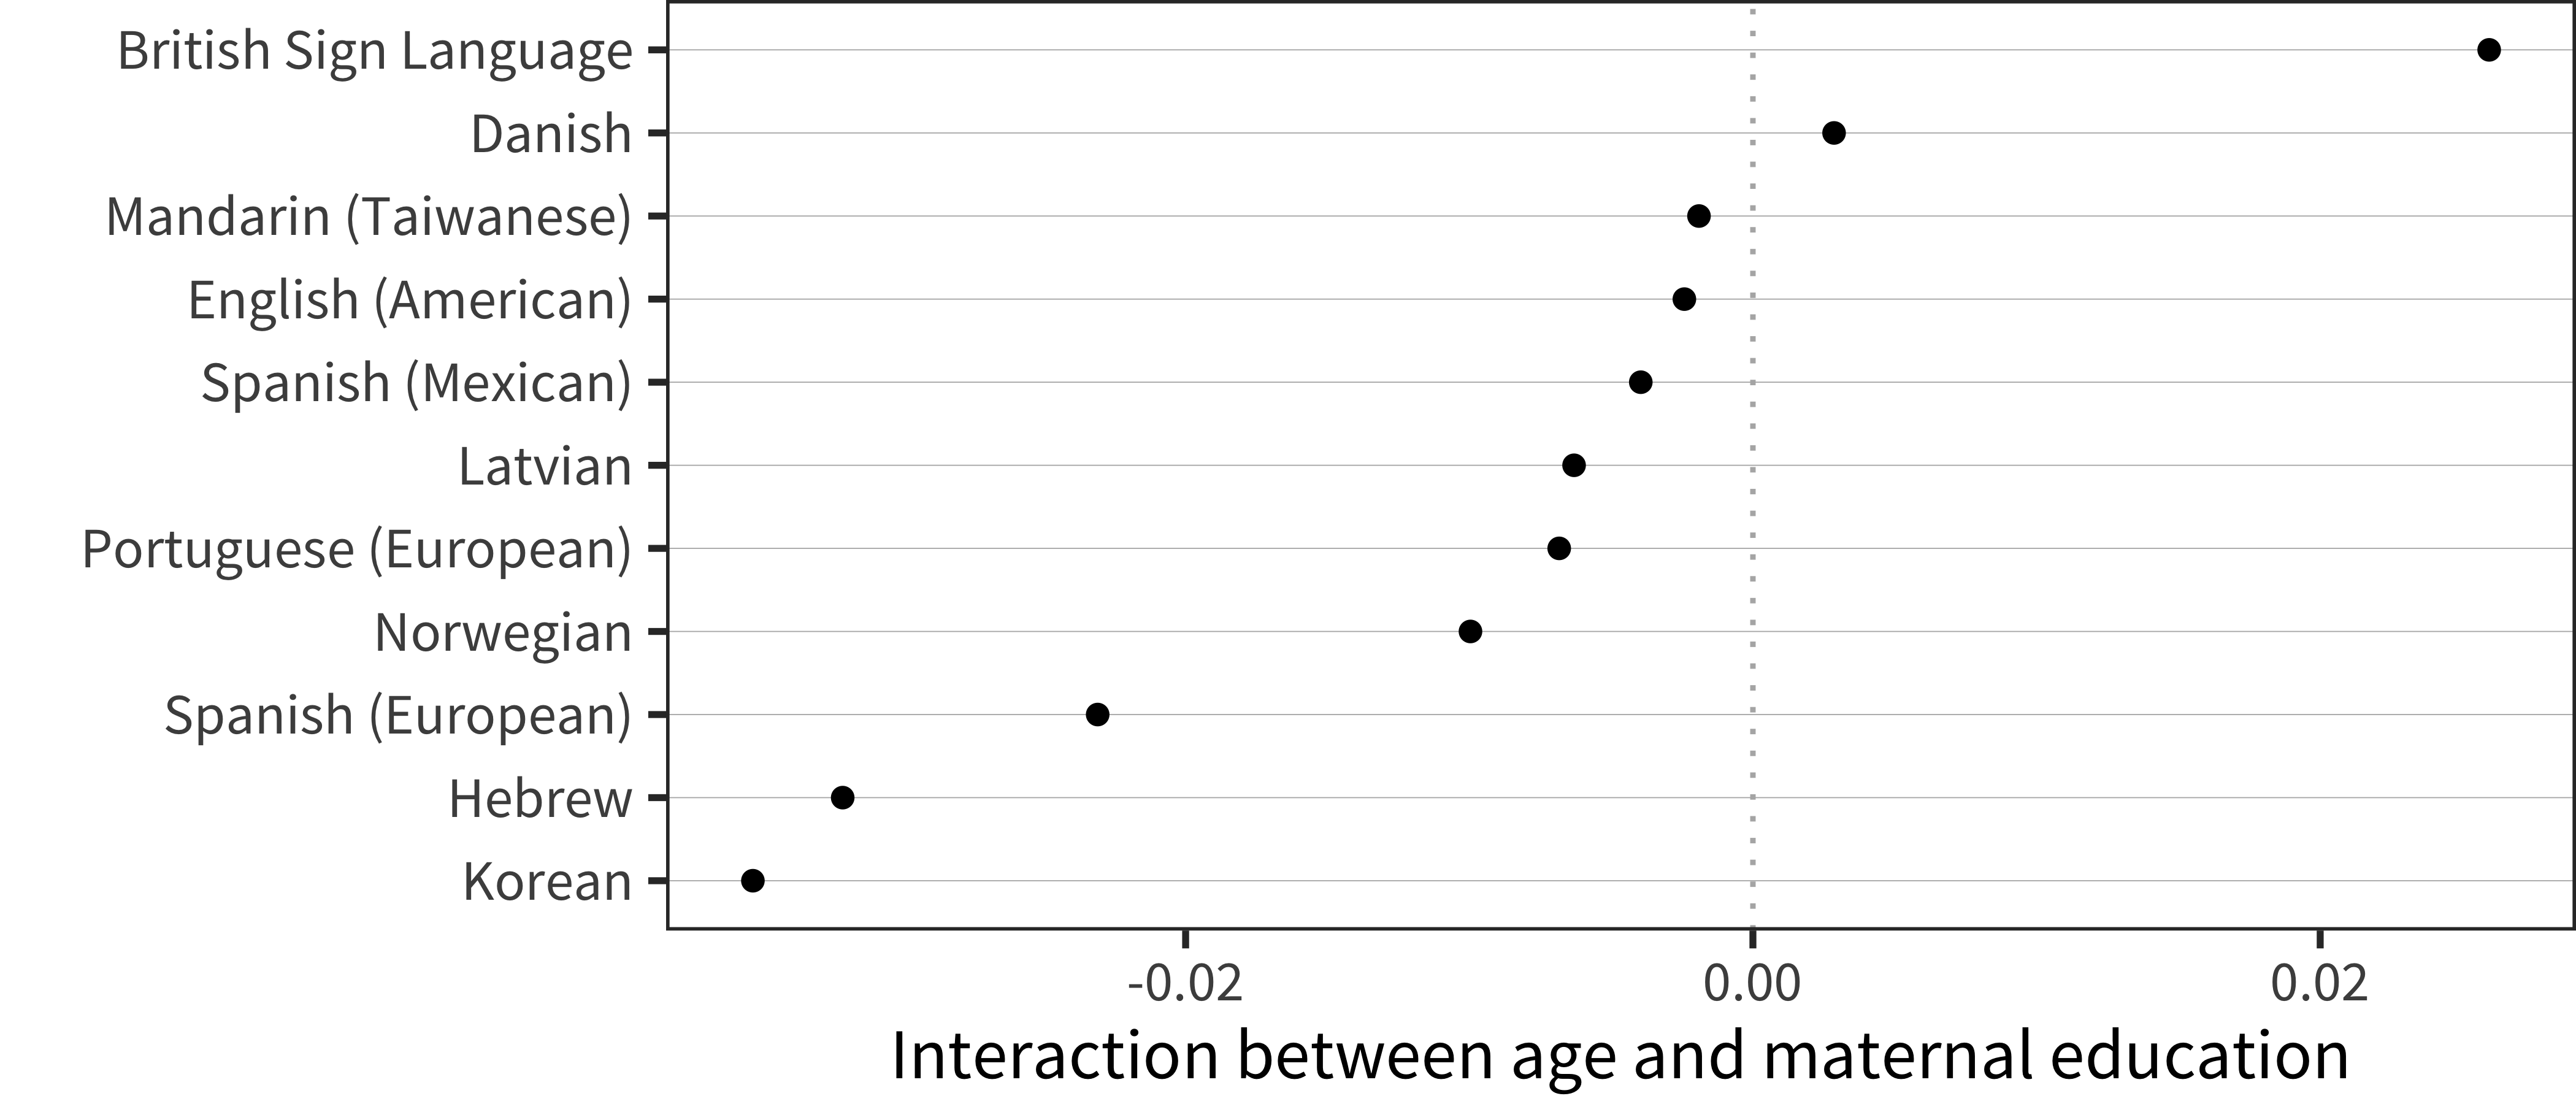 Interaction term between age and maternal education for WG comprehension data in each language.